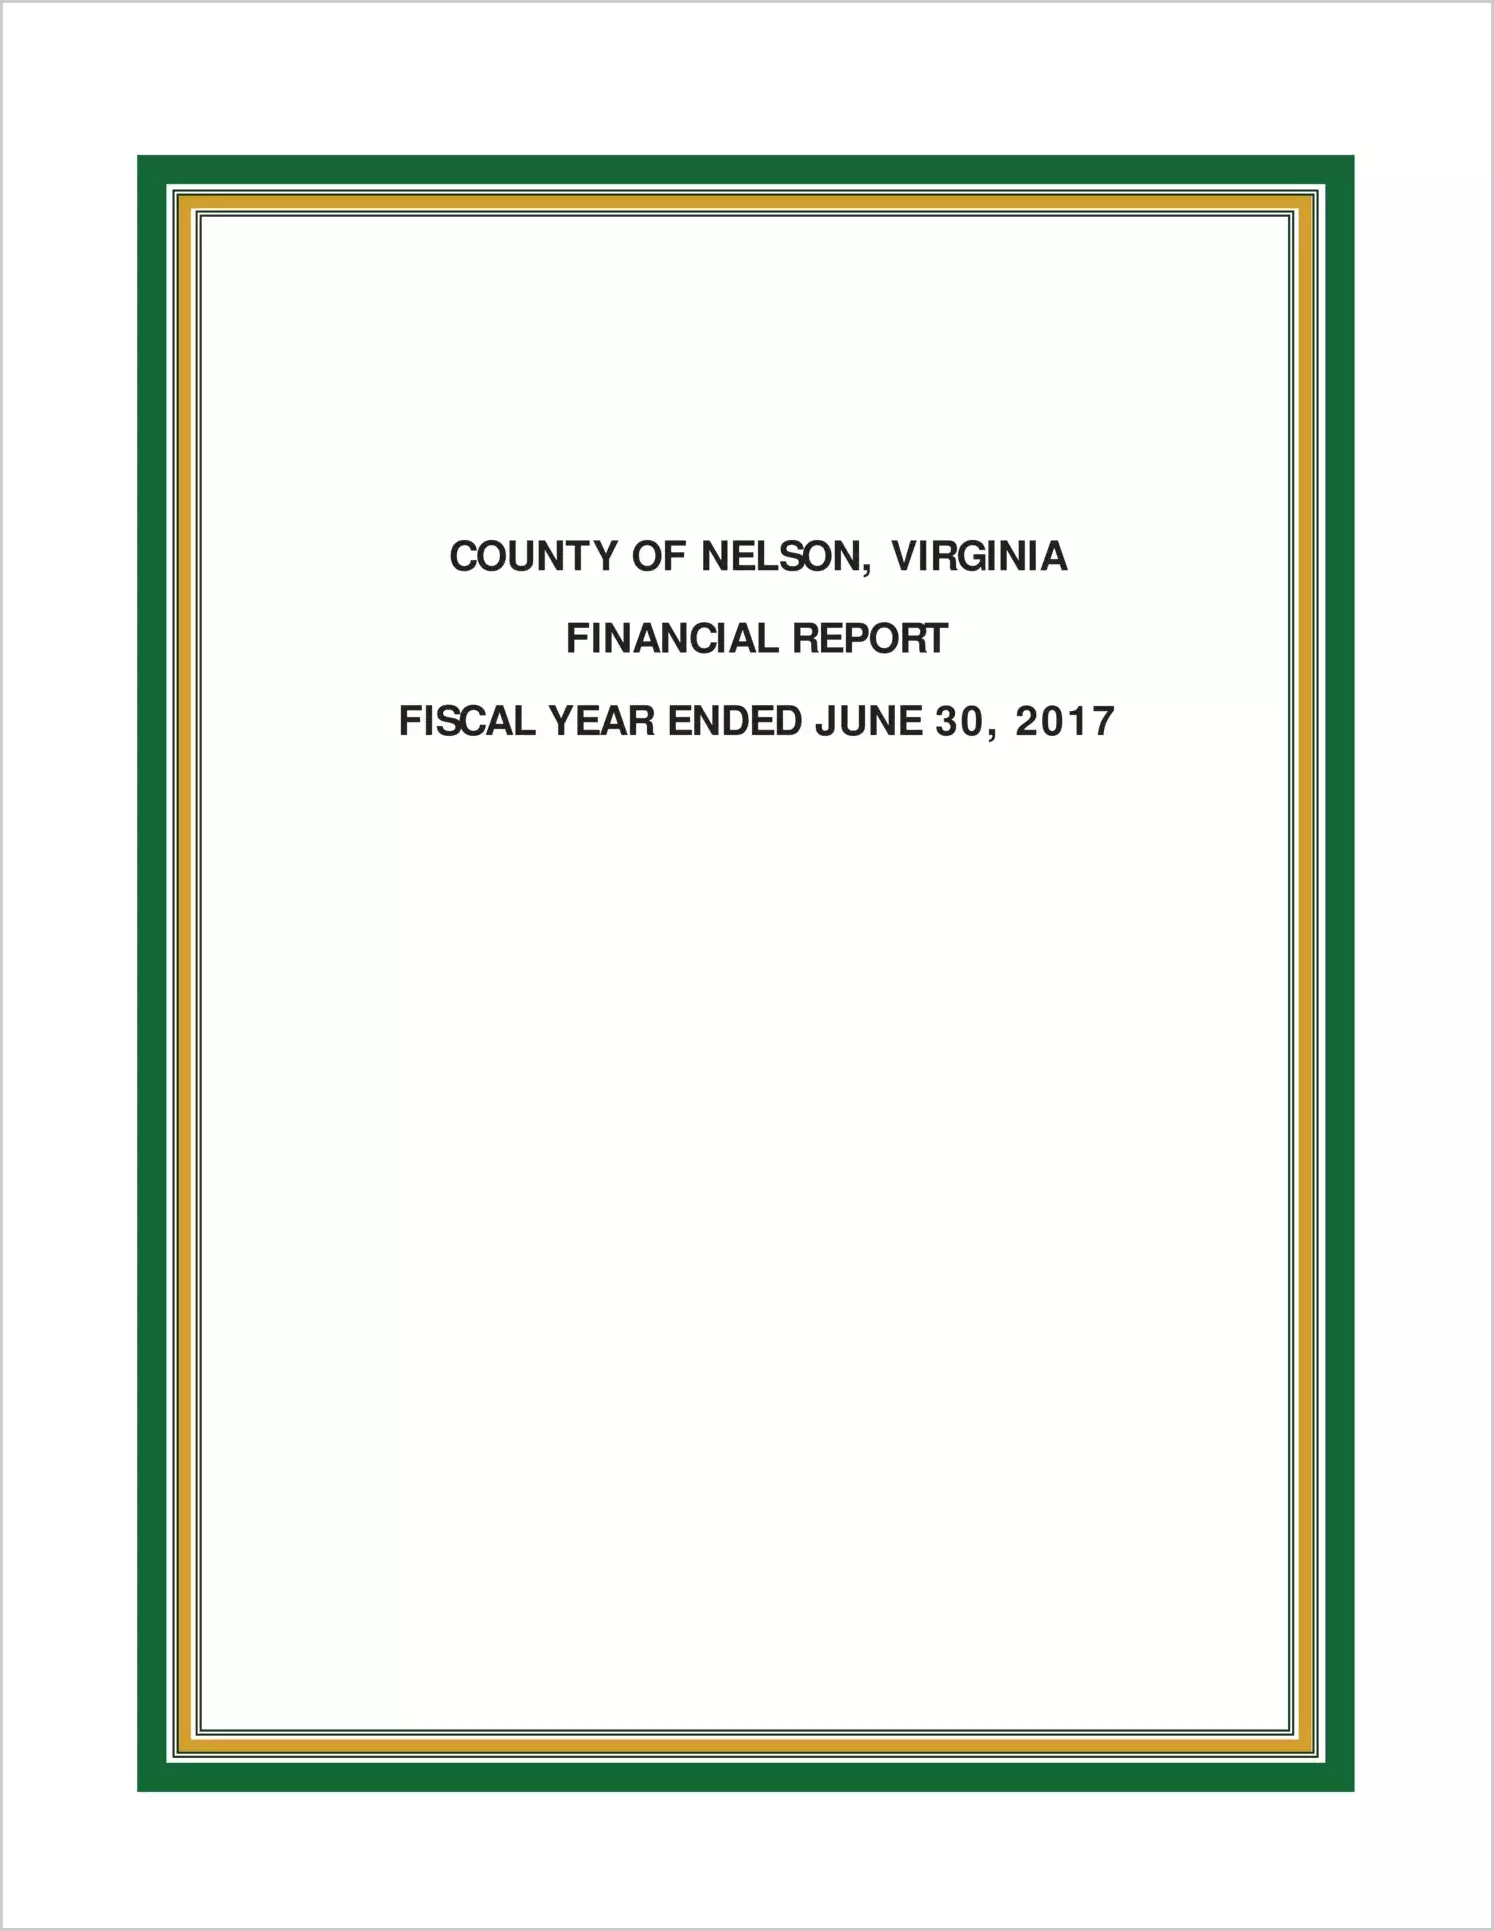 2017 Annual Financial Report for County of Nelson